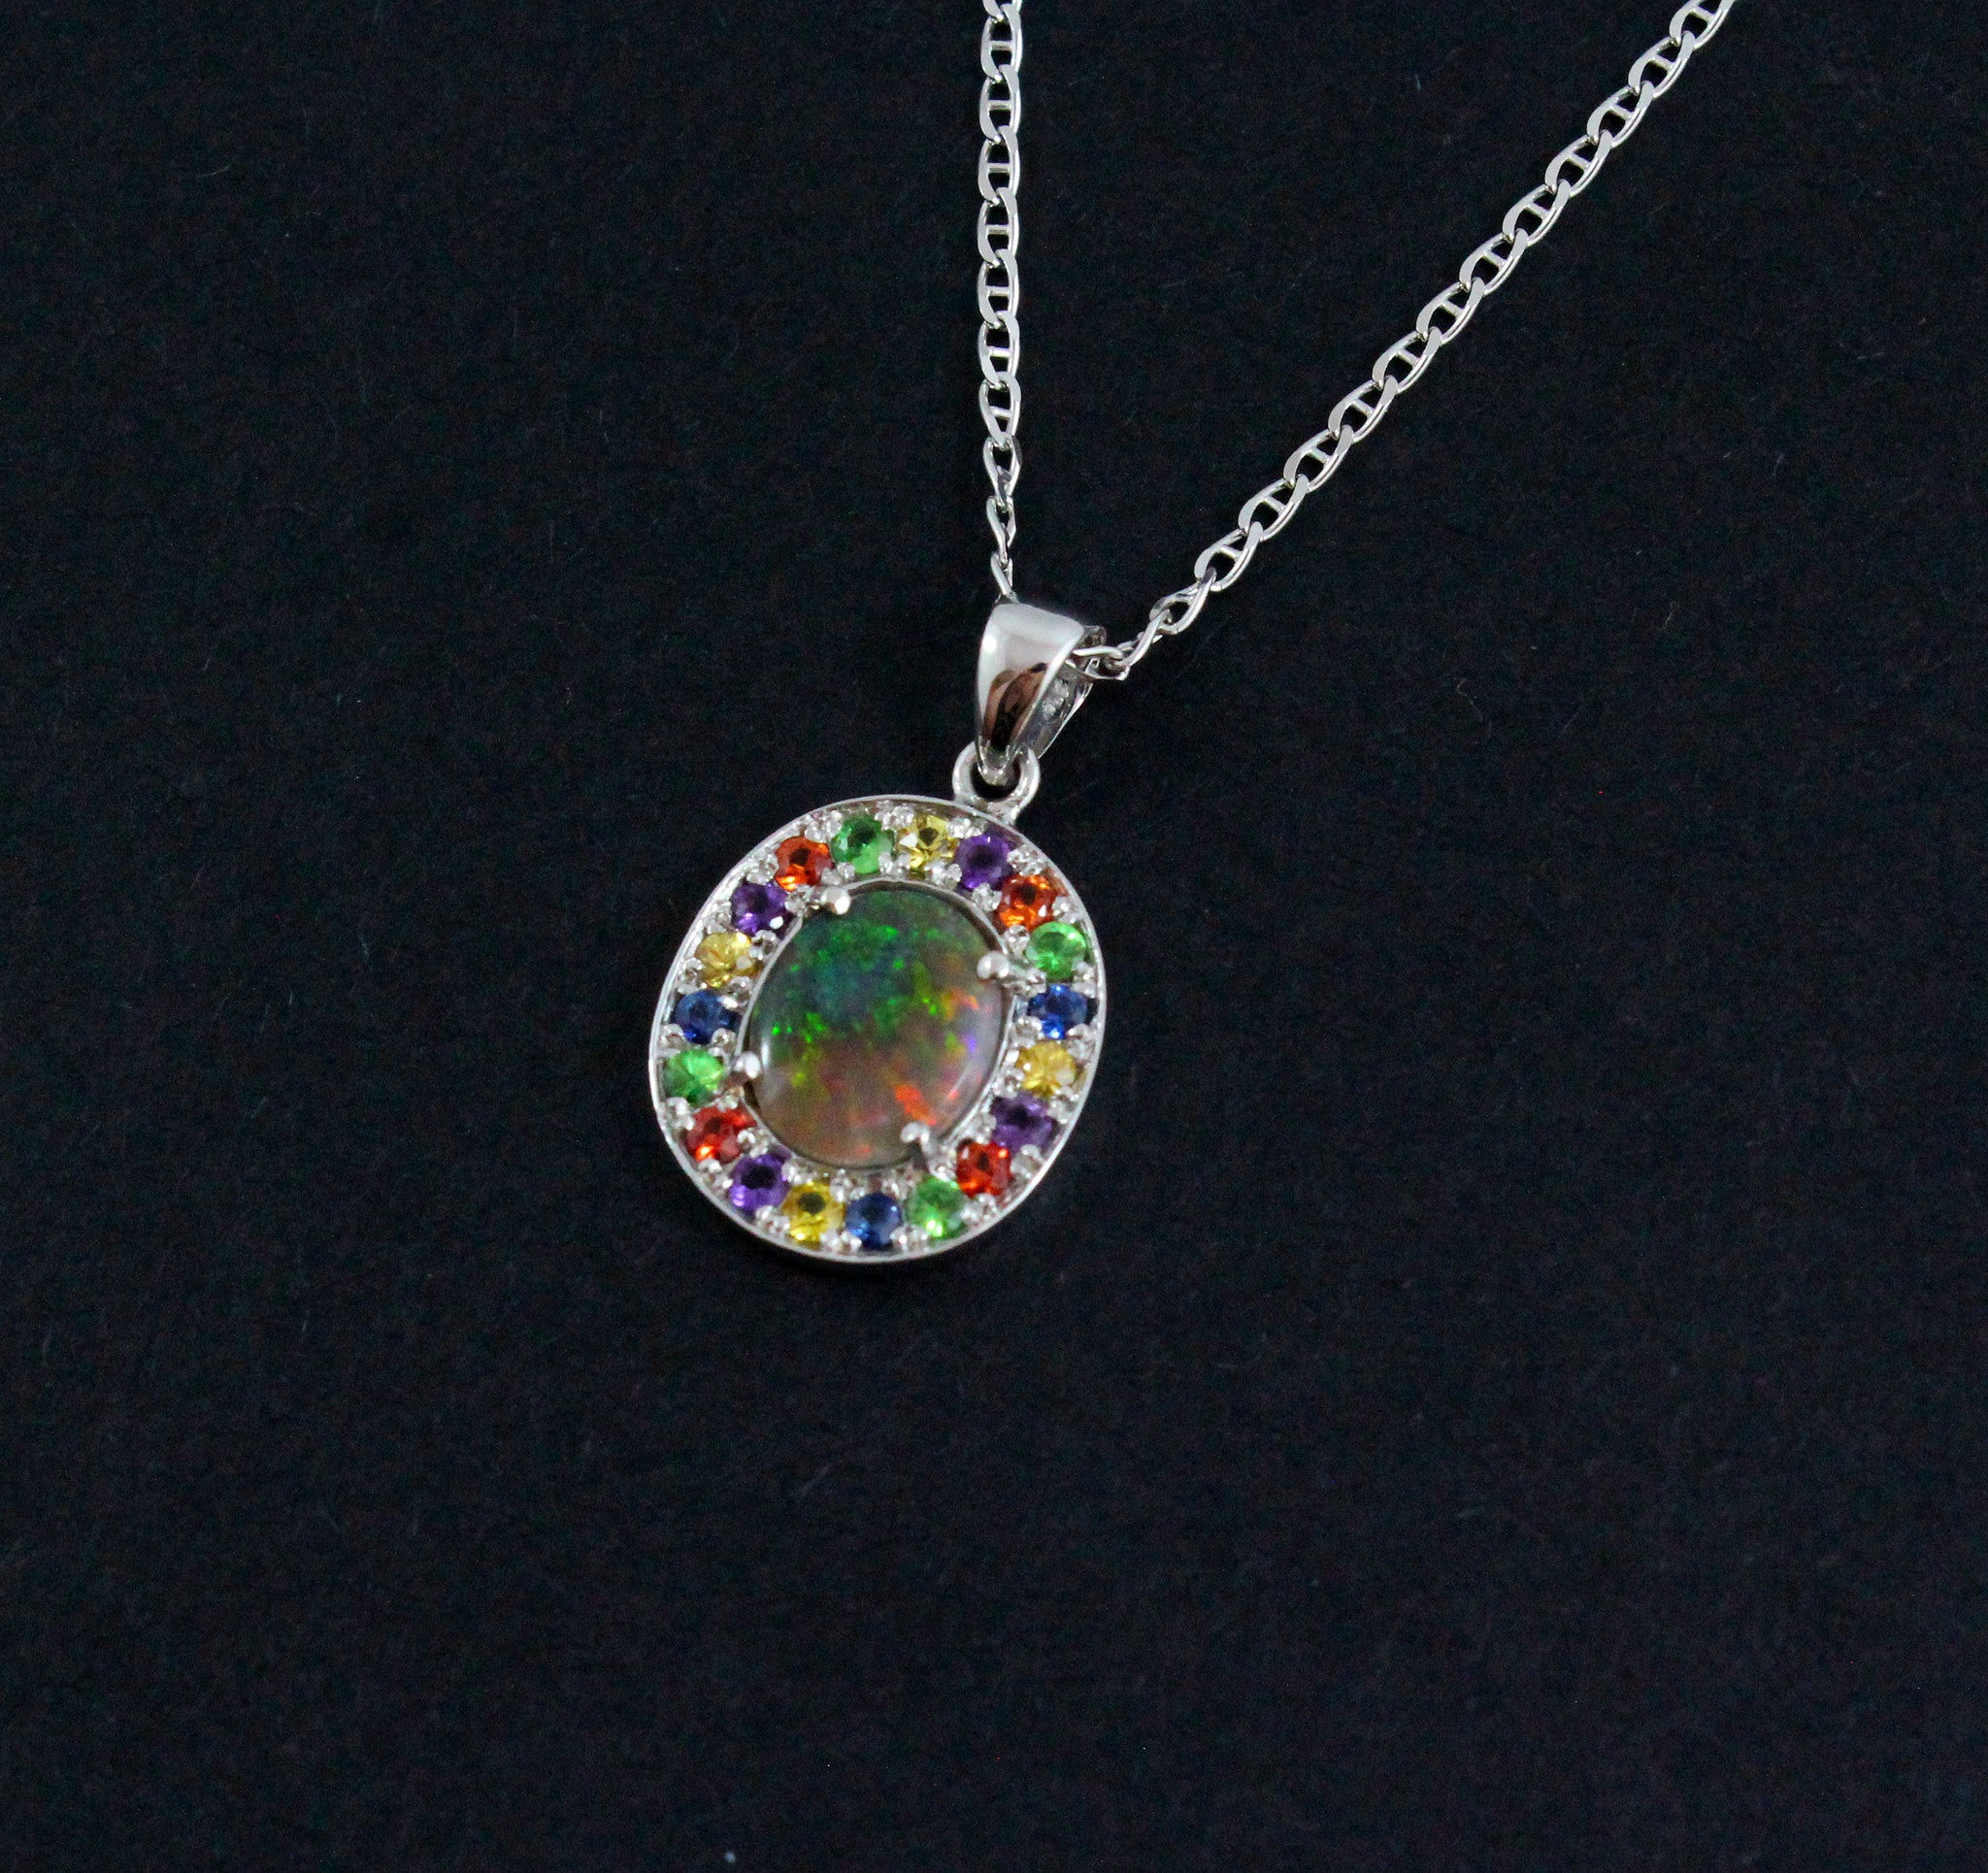 Australian opal fancy sapphires and amethyst halo white gold pendant necklace - Sarah Hughes - 4